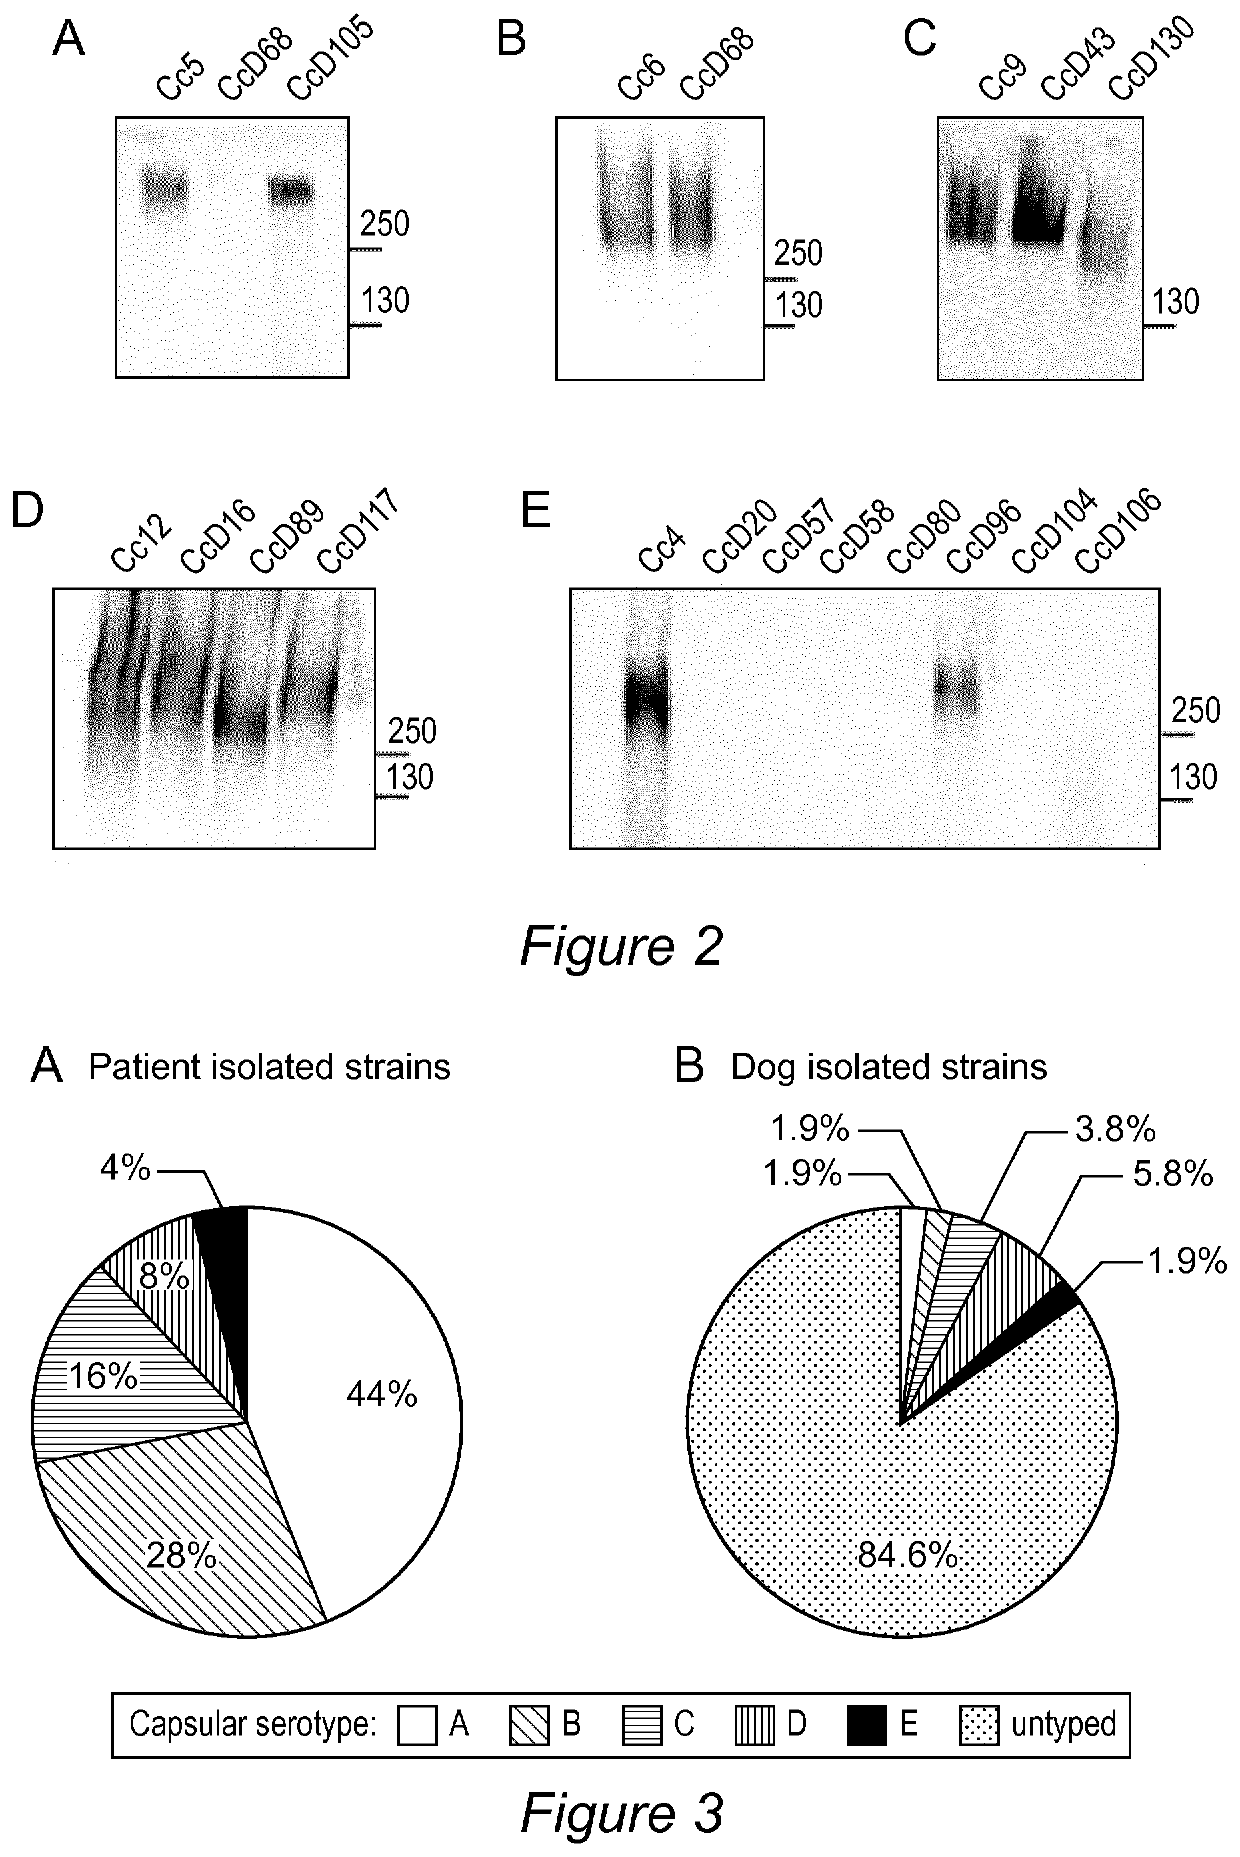 Methods for detecting c. canimorsus capsular serotypes in a sample